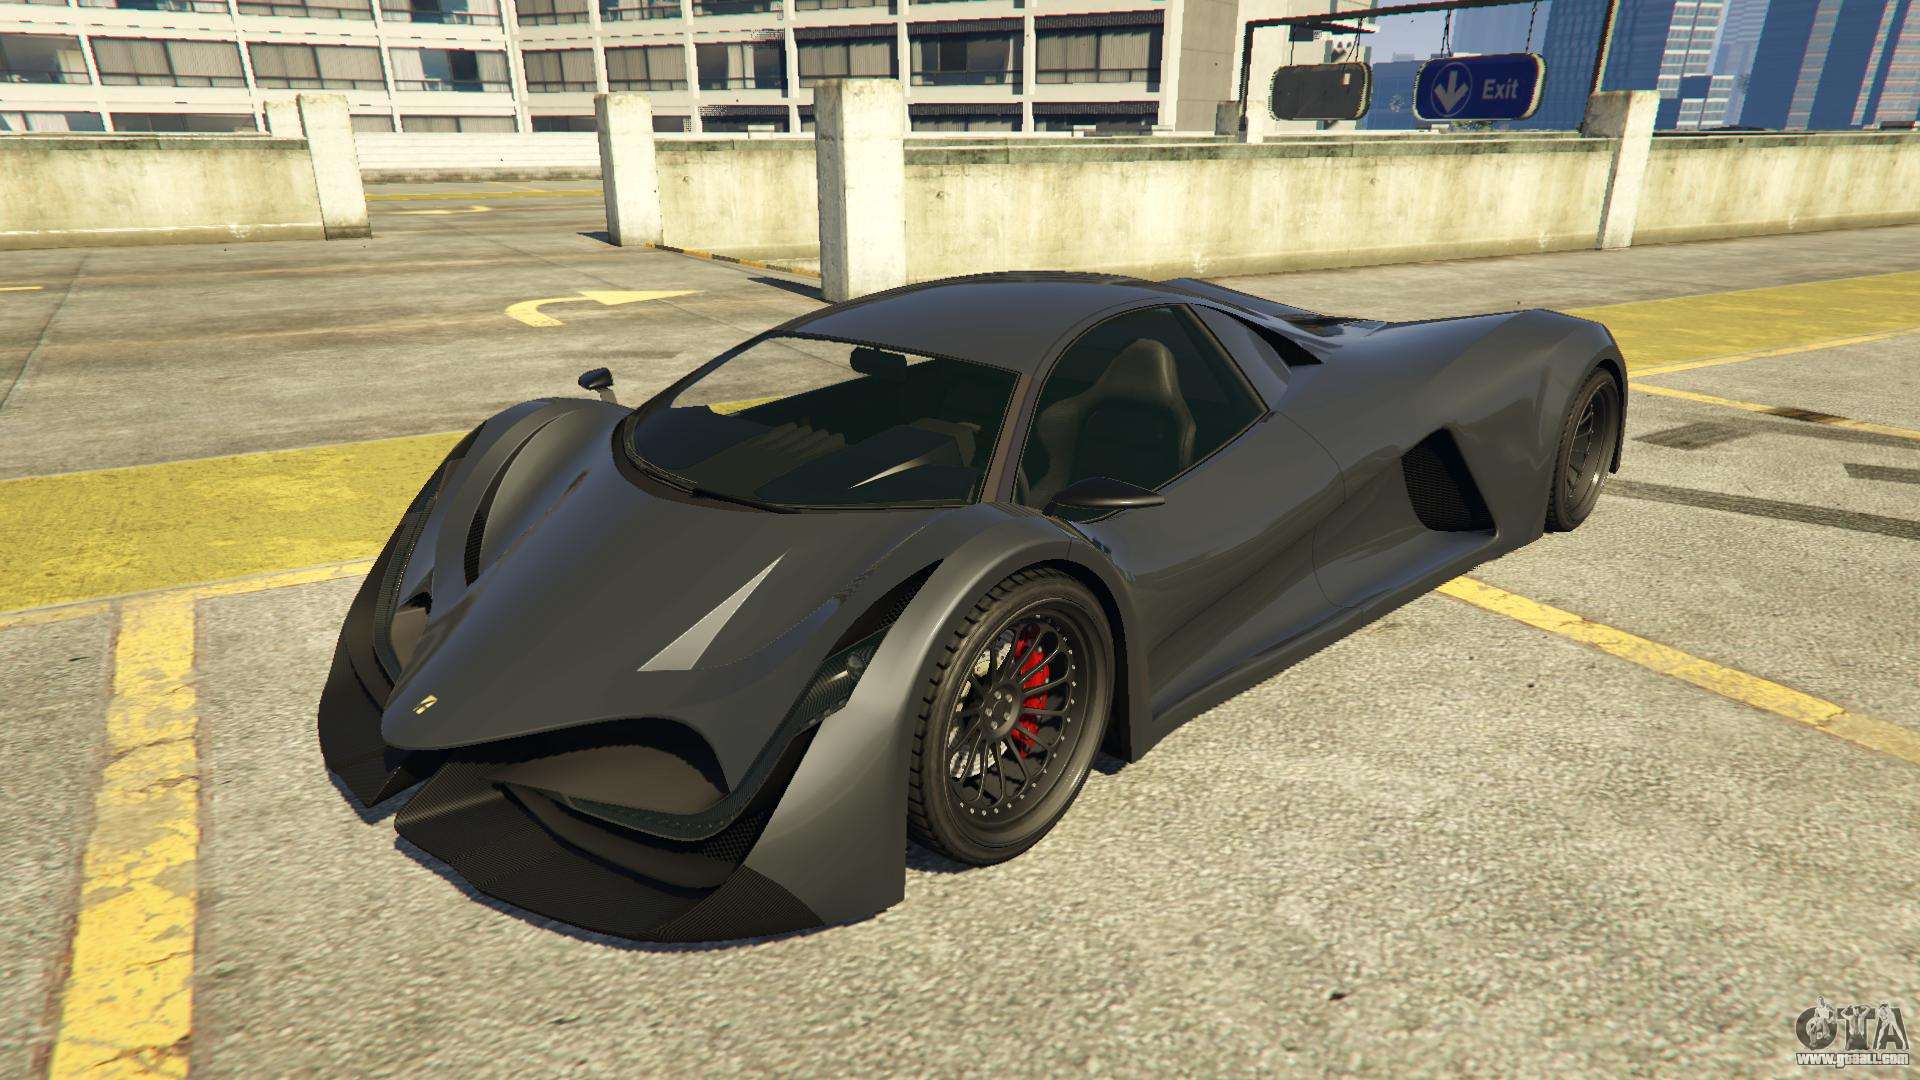 Principe Deveste Eight in GTA 5 Online where to find and to buy and